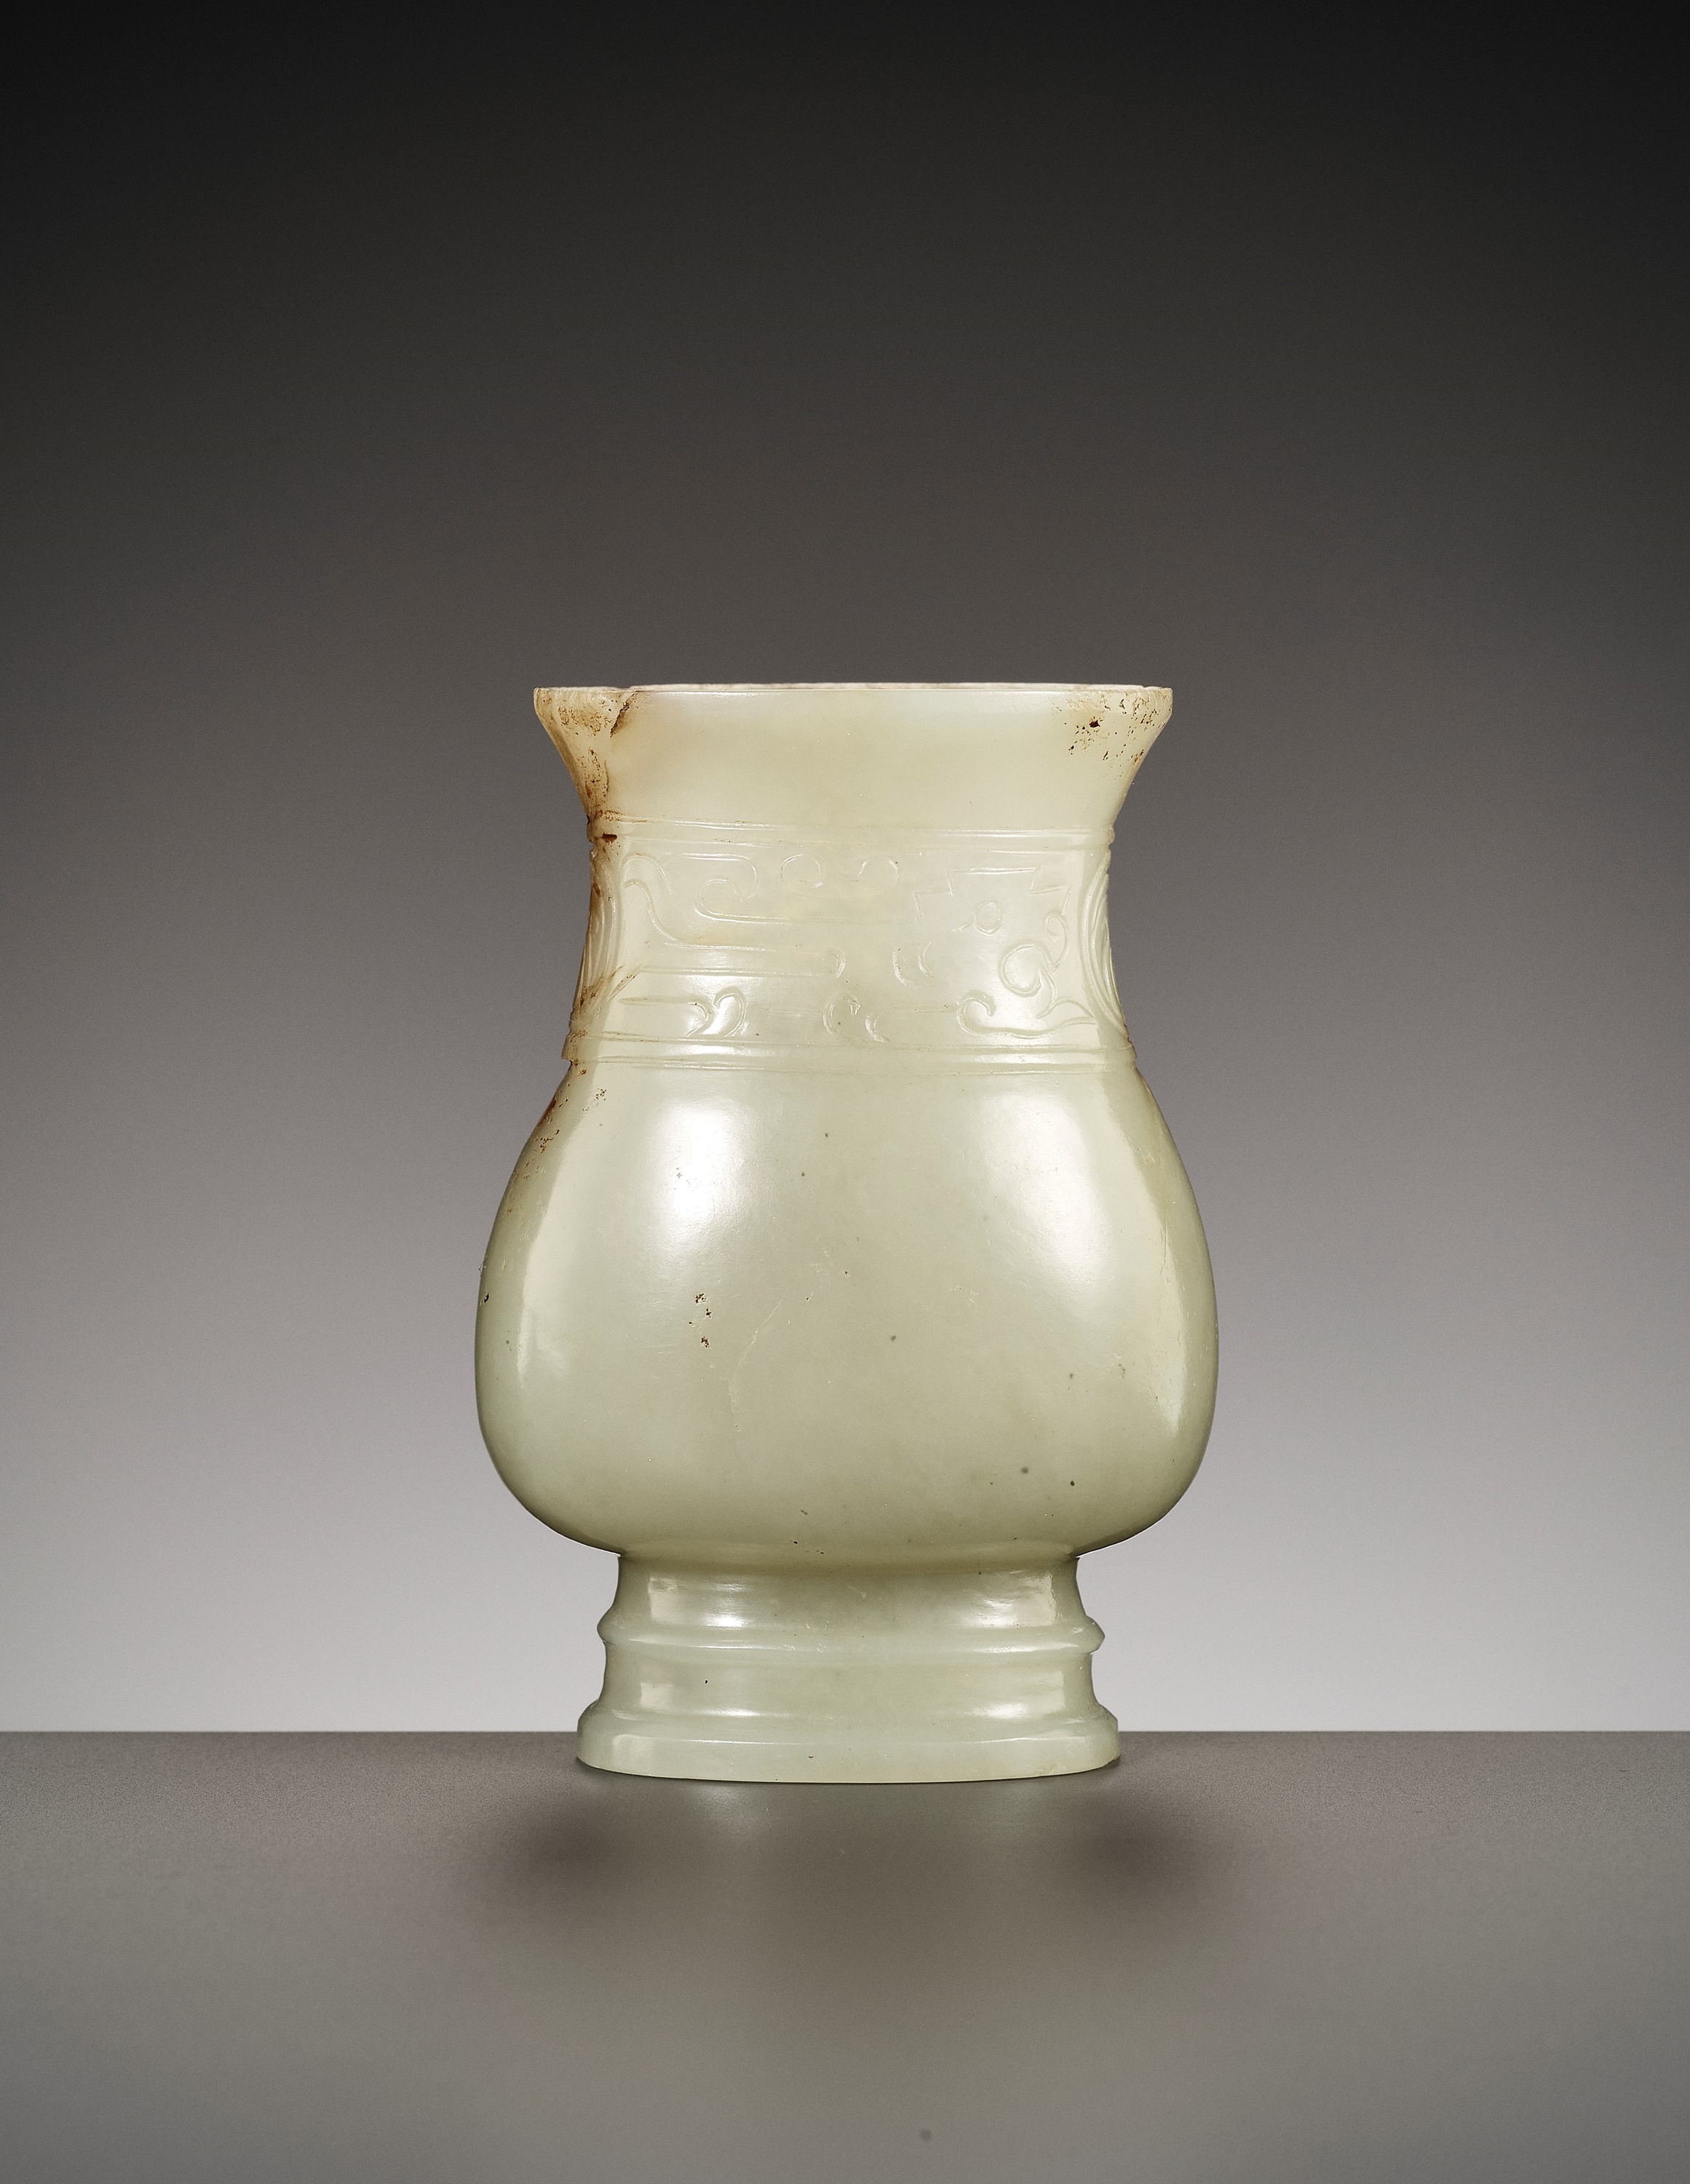 A RARE ARCHAISTIC 'SHANG BRONZE IMITATION' JADE VESSEL, ZHI, LATE SONG TO EARLY MING DYNASTY